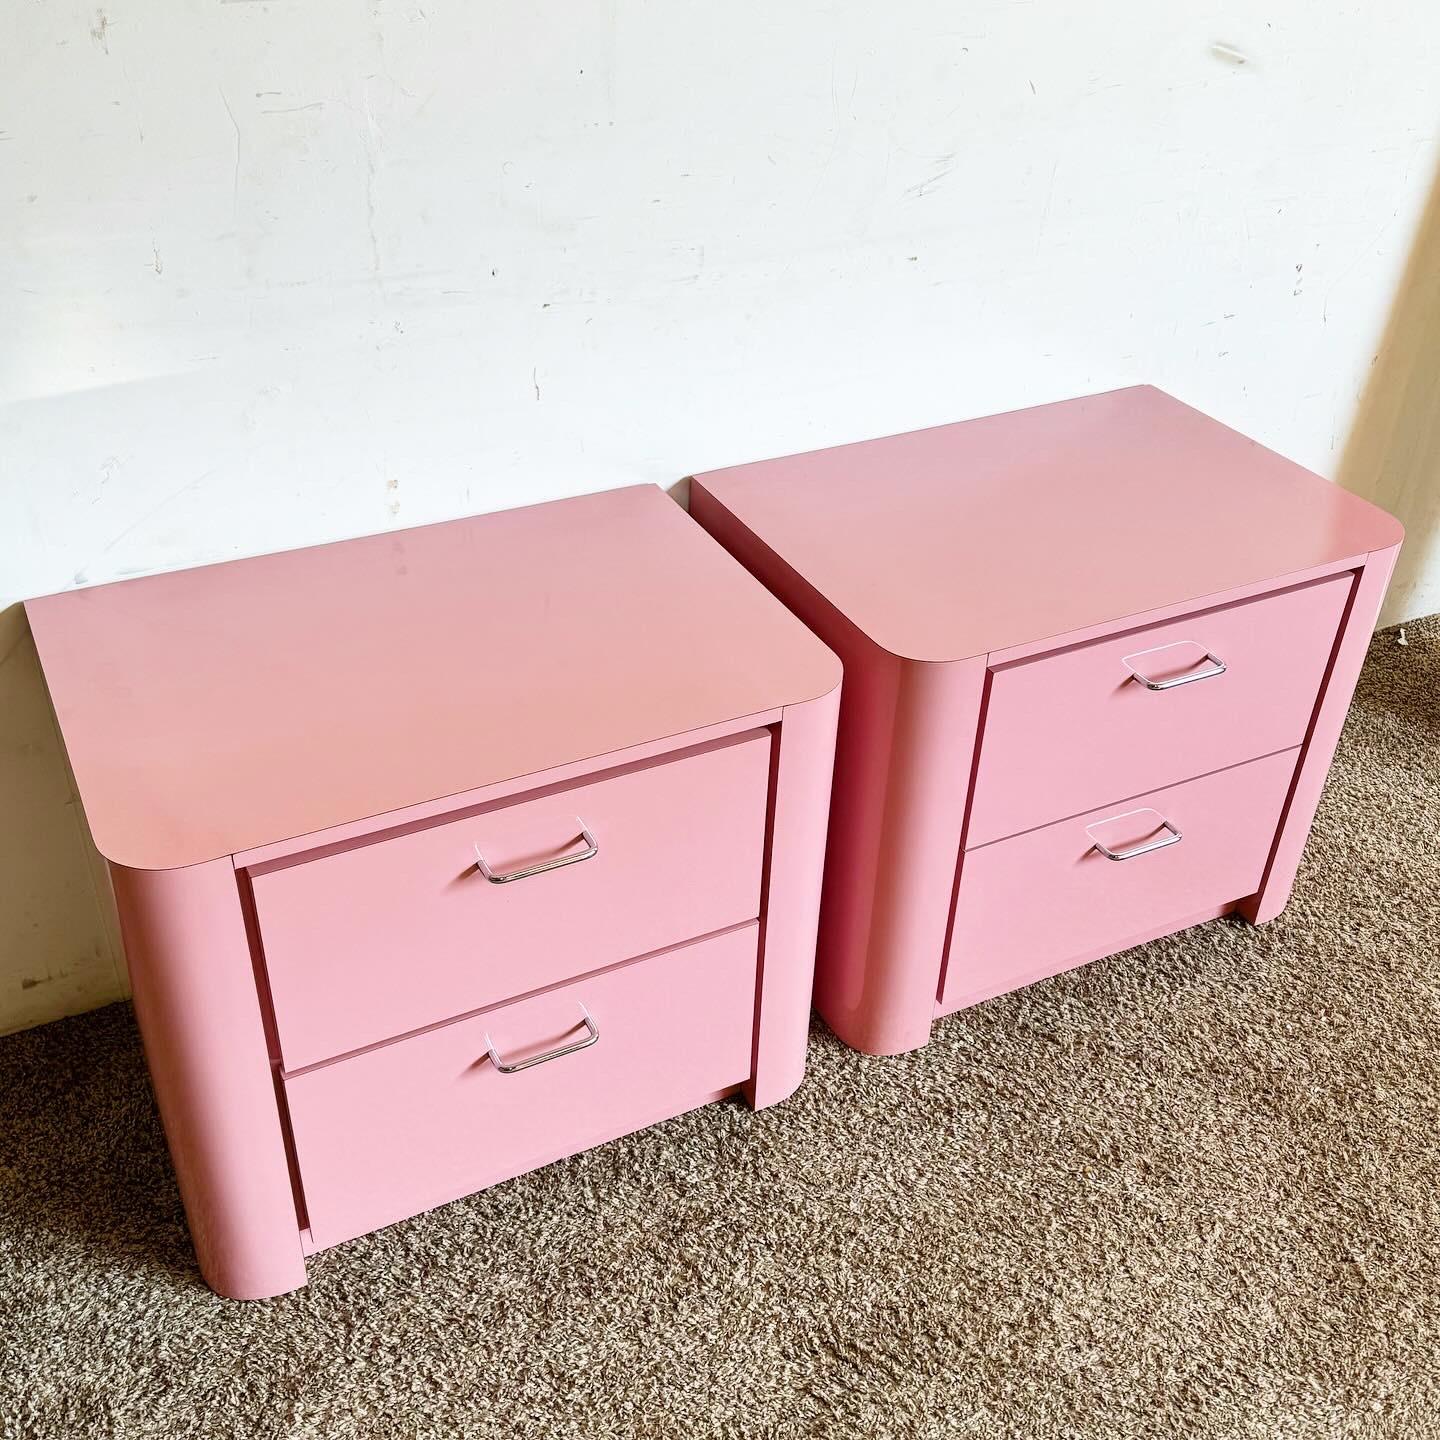 20th Century Postmodern Pink Lacquer Laminate Nightstands With Chrome Handles - a Pair For Sale